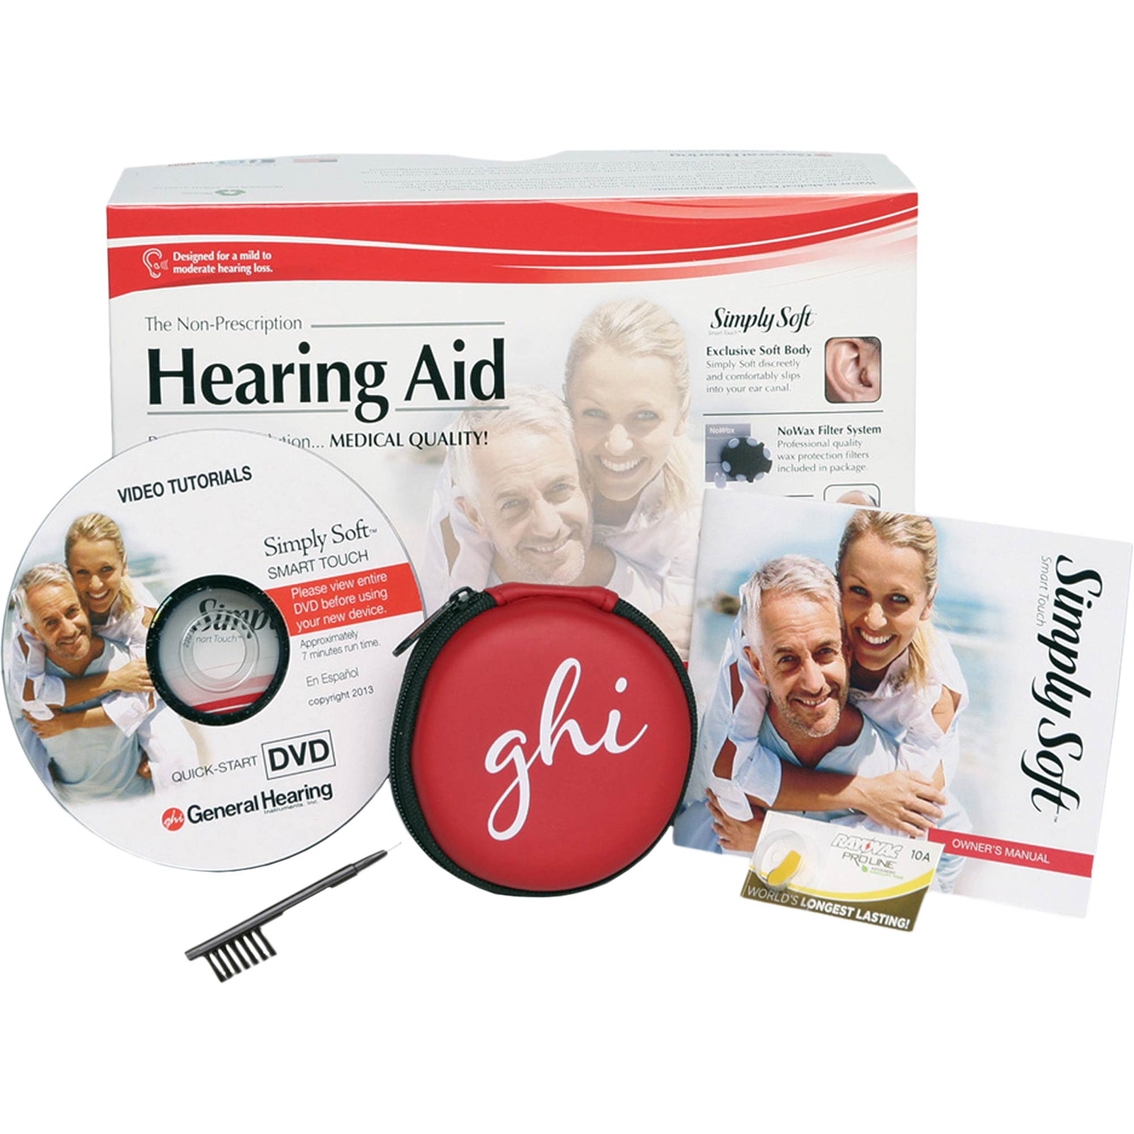 General Hearing Instruments SimplySoft Smart Touch Digital Left Ear Hearing Aid - Image 4 of 4